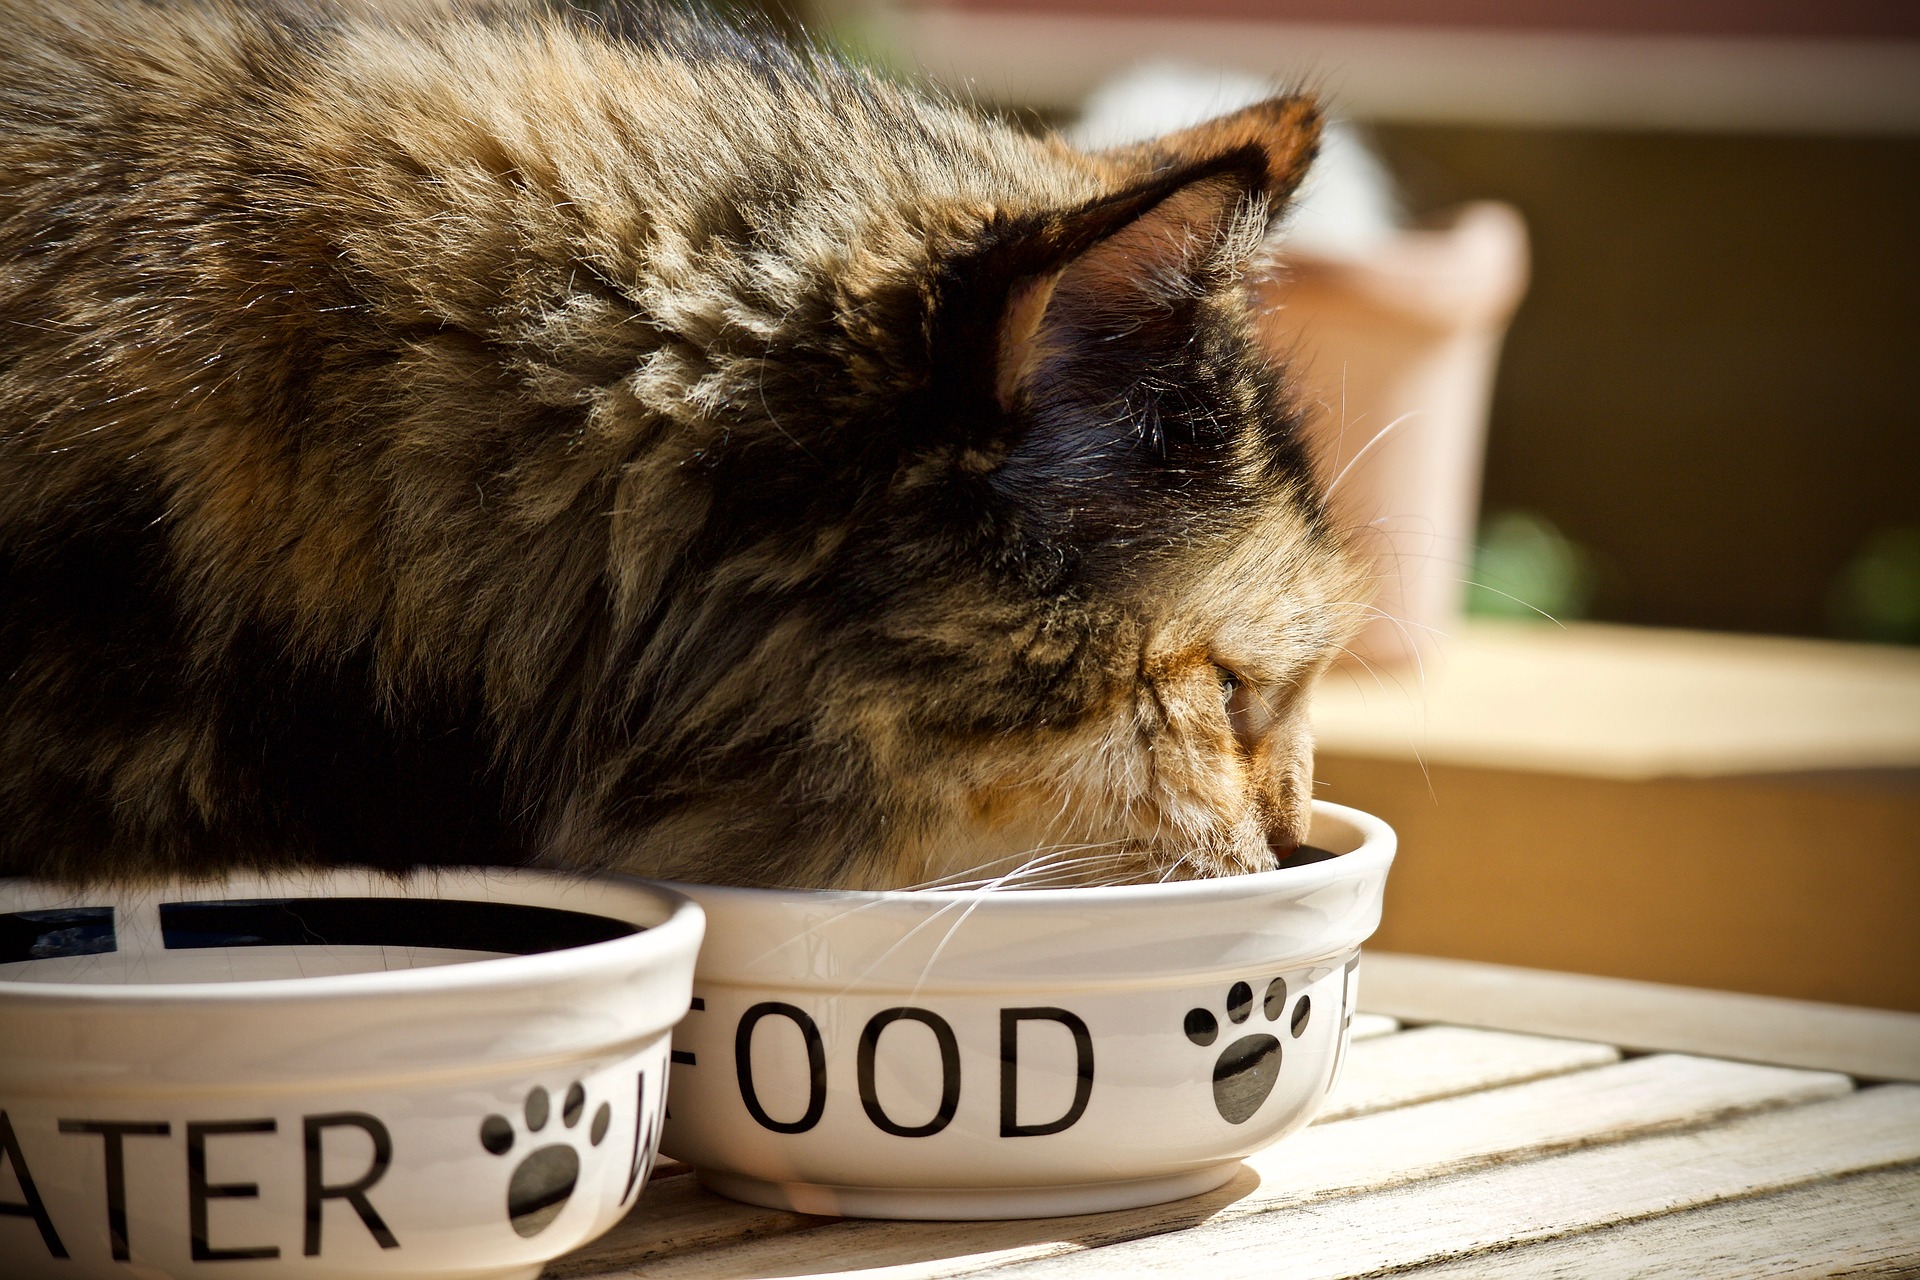 Cat eating food from bowl.